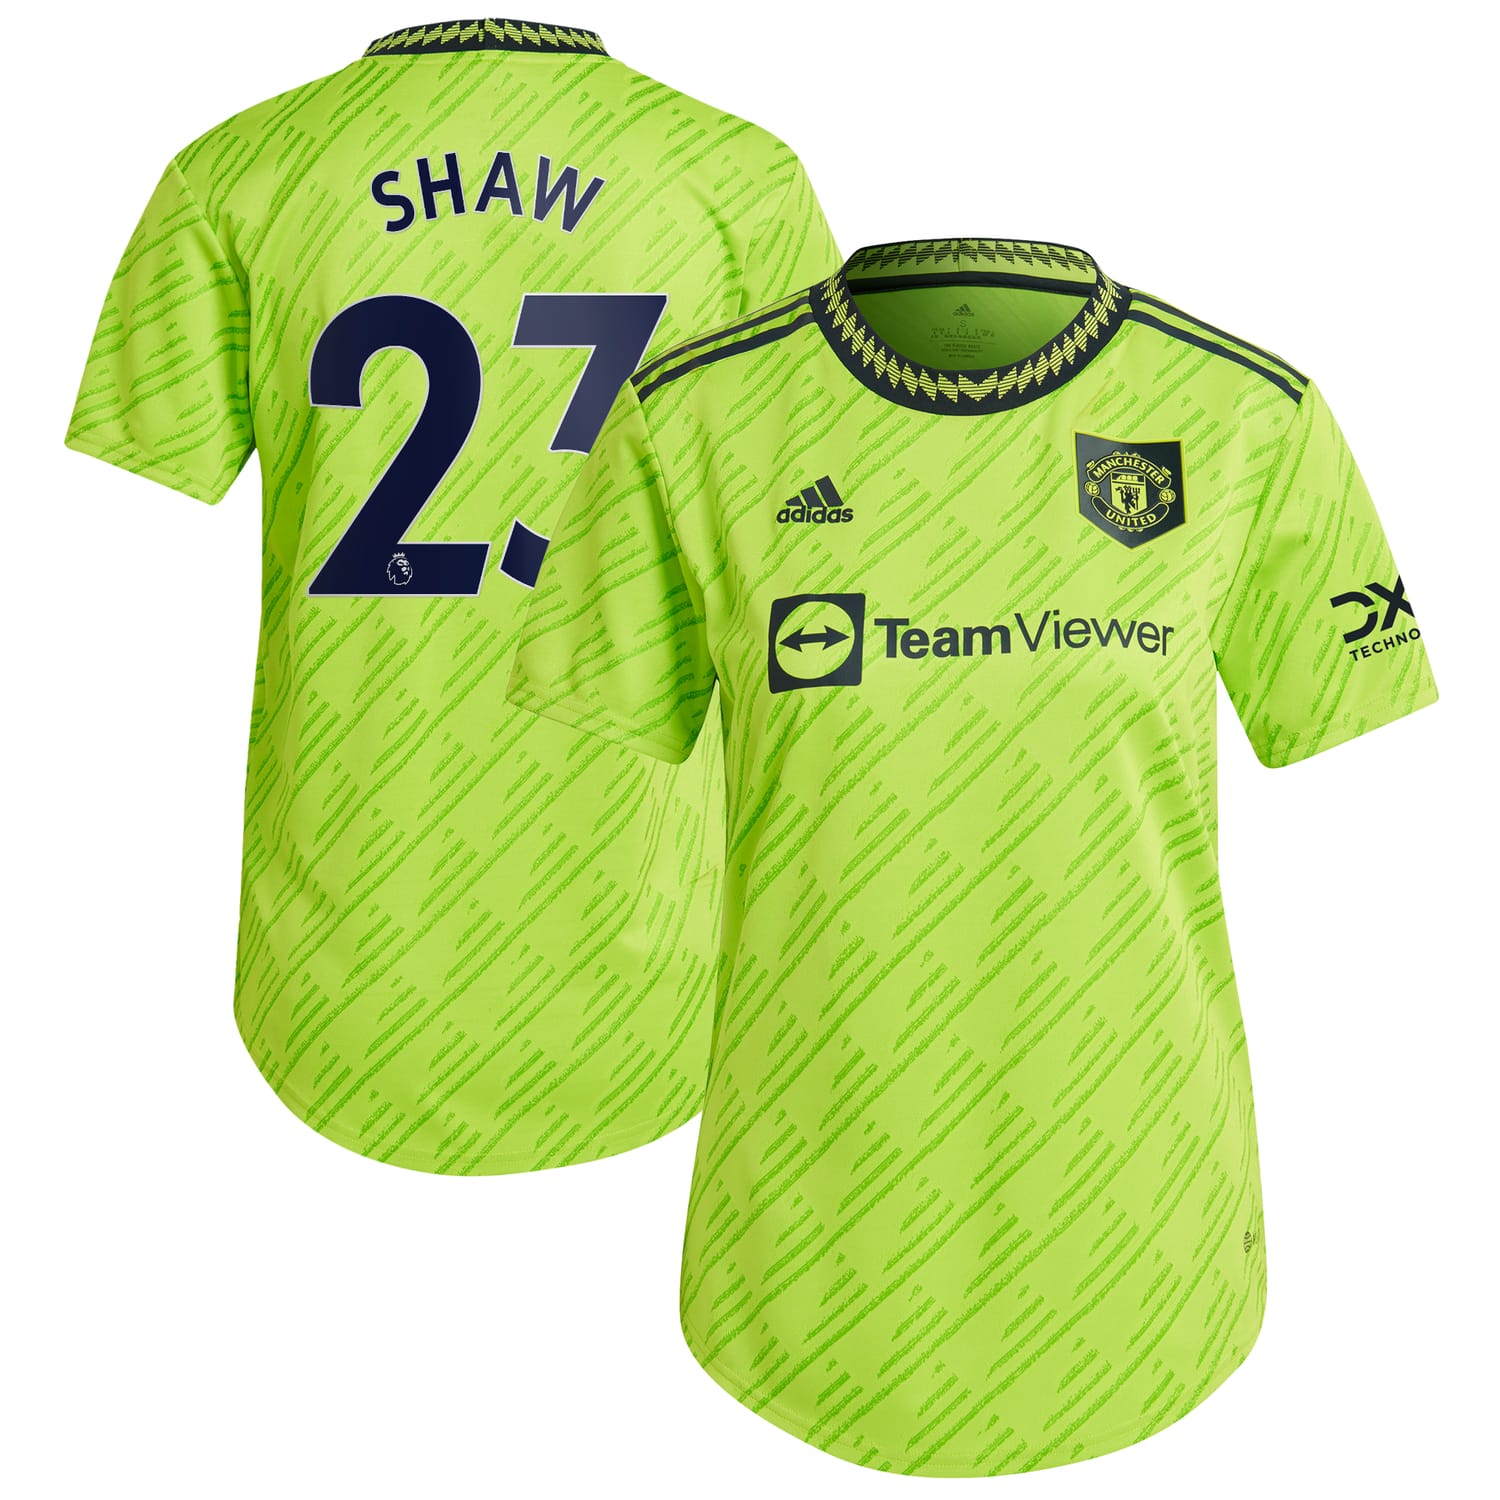 Premier League Manchester United Third Authentic Jersey Shirt 2022-23 player Luke Shaw 23 printing for Women